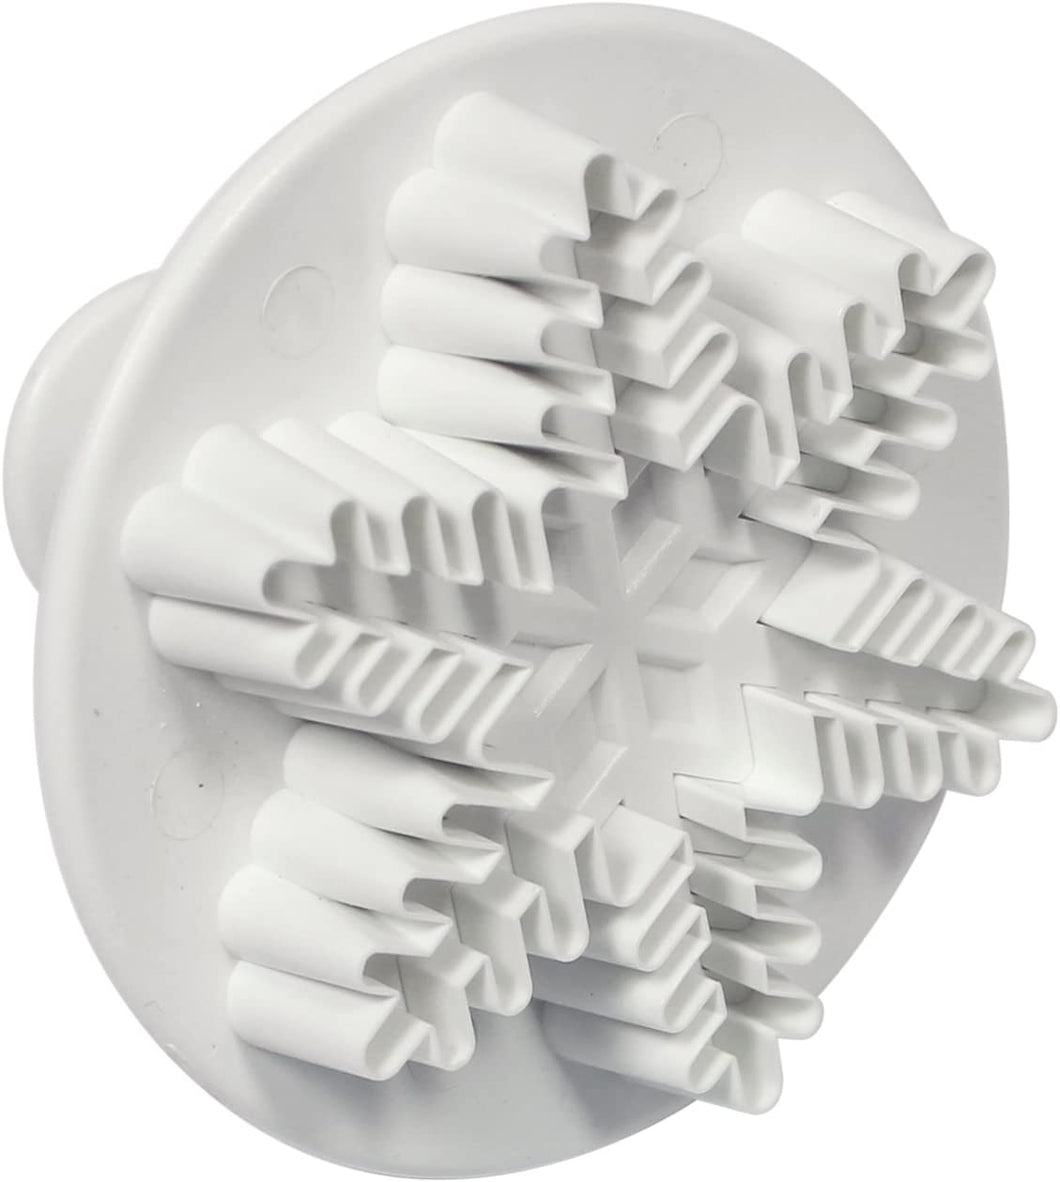 Cutter: Snowflake Plunger - Large